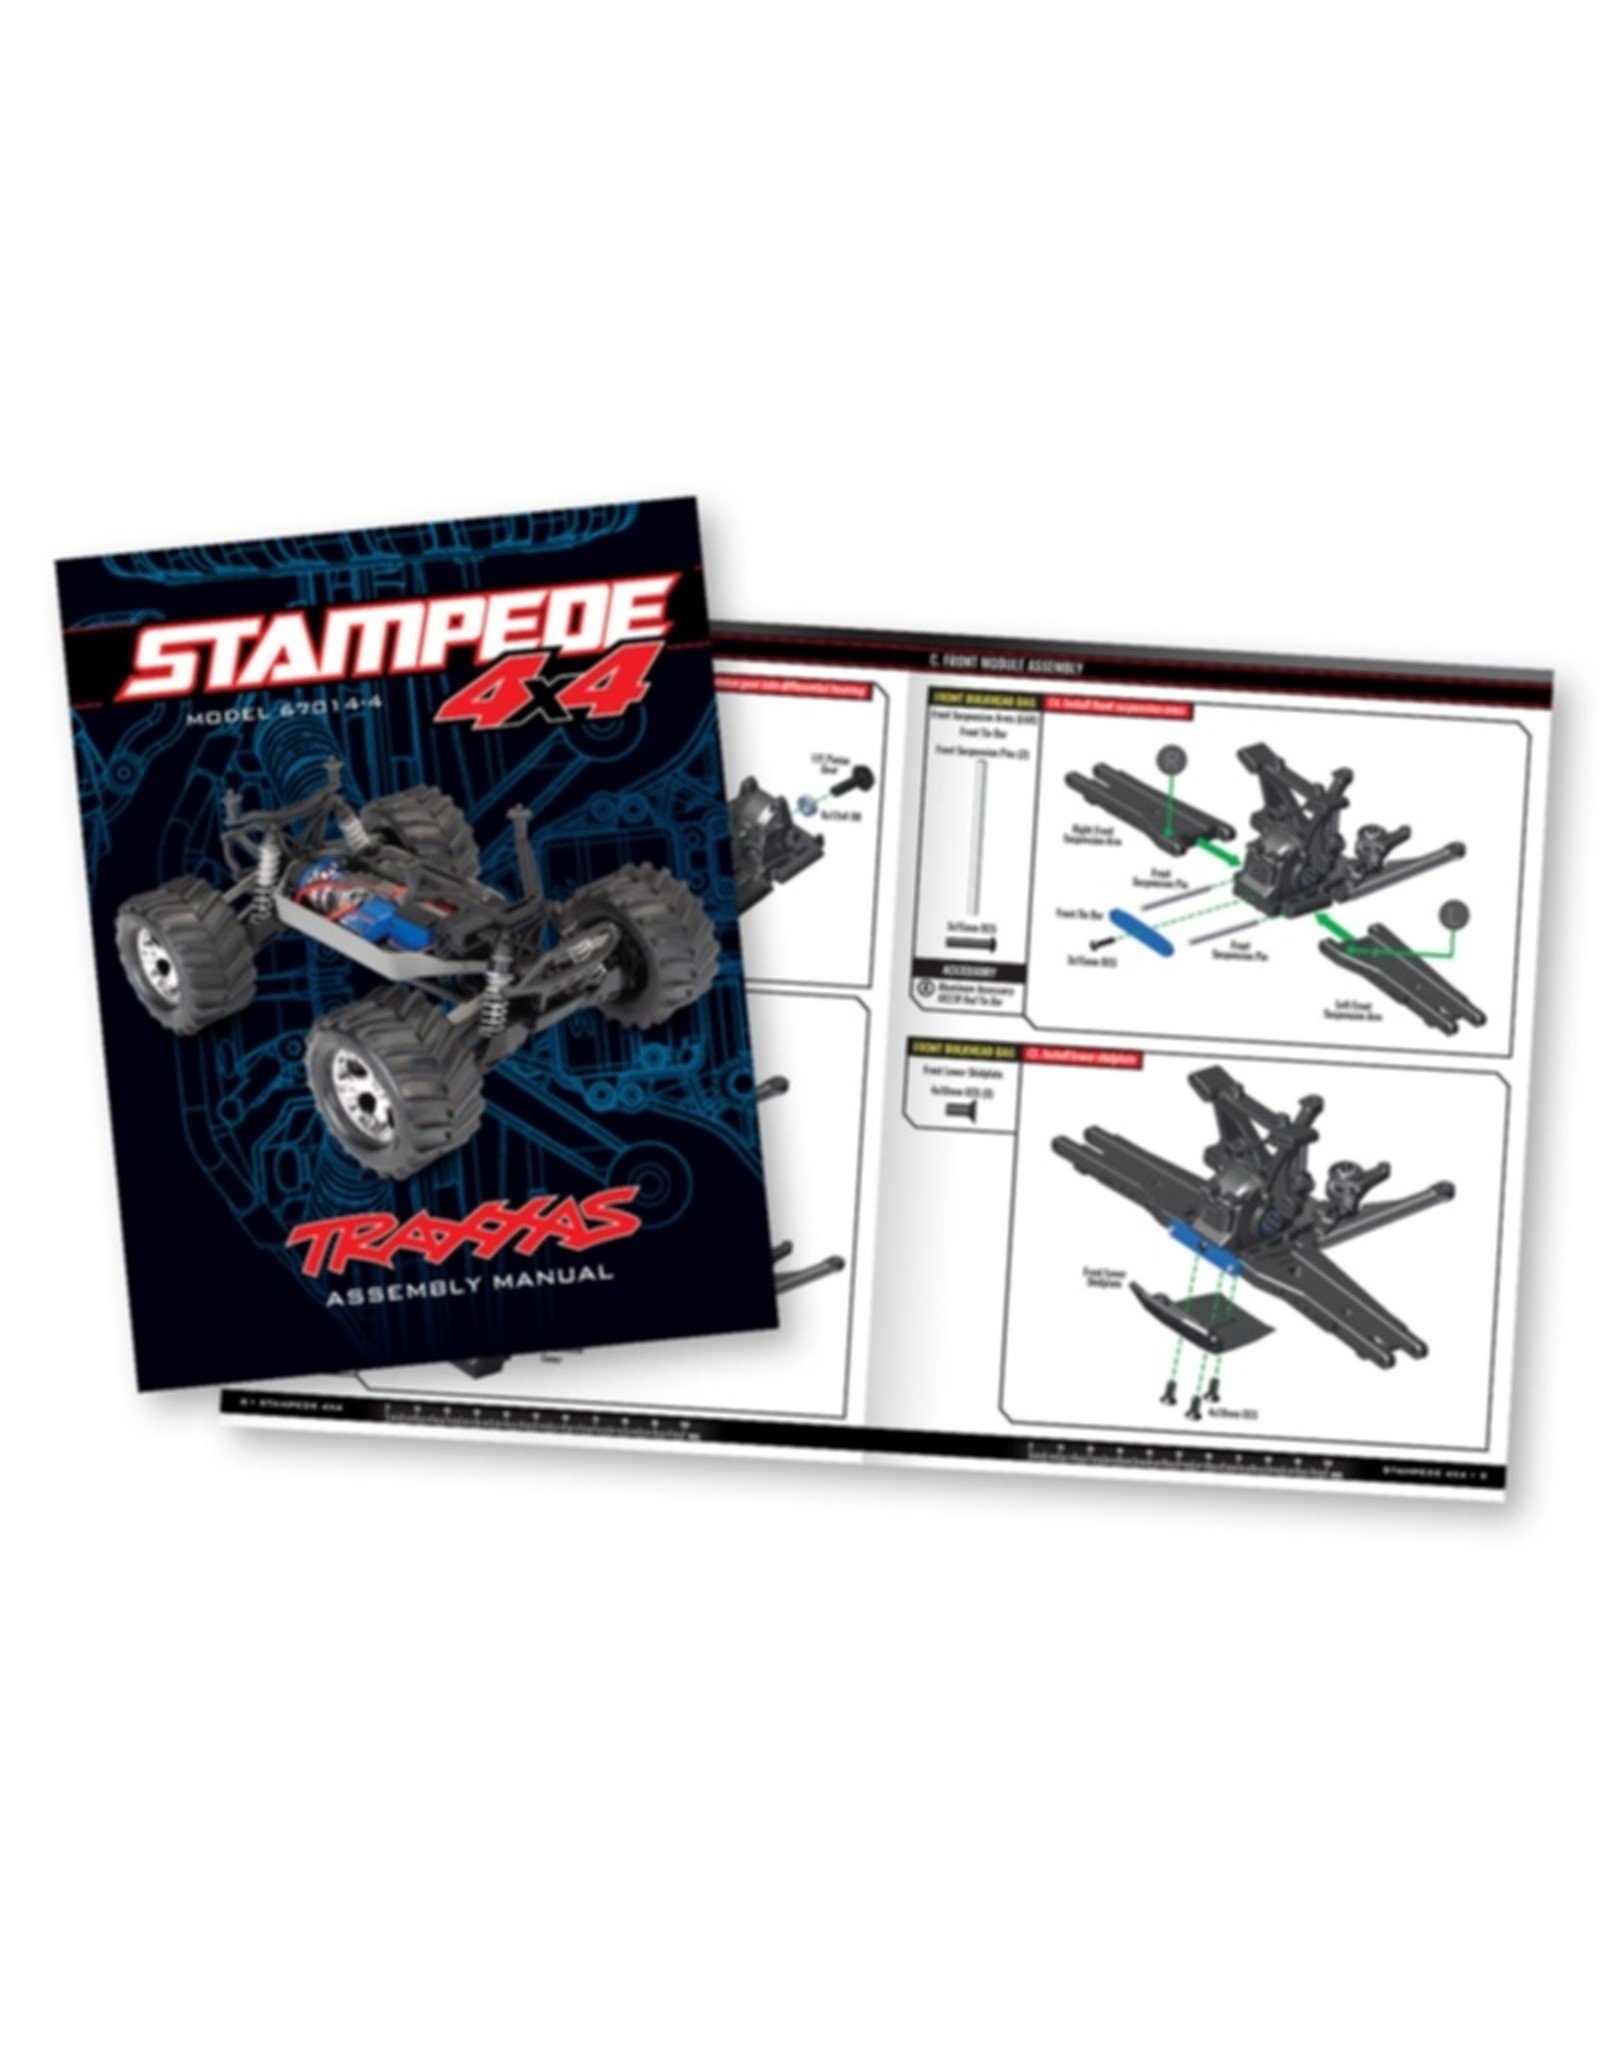 Traxxas TRA67014-4 - Stampede 4X4 Assembly Kit: 1/10 Scale 4WD Chassis. Ready-To-Race® with TQ 2.4GHz radio system and XL-5 ESC (fwd/rev).